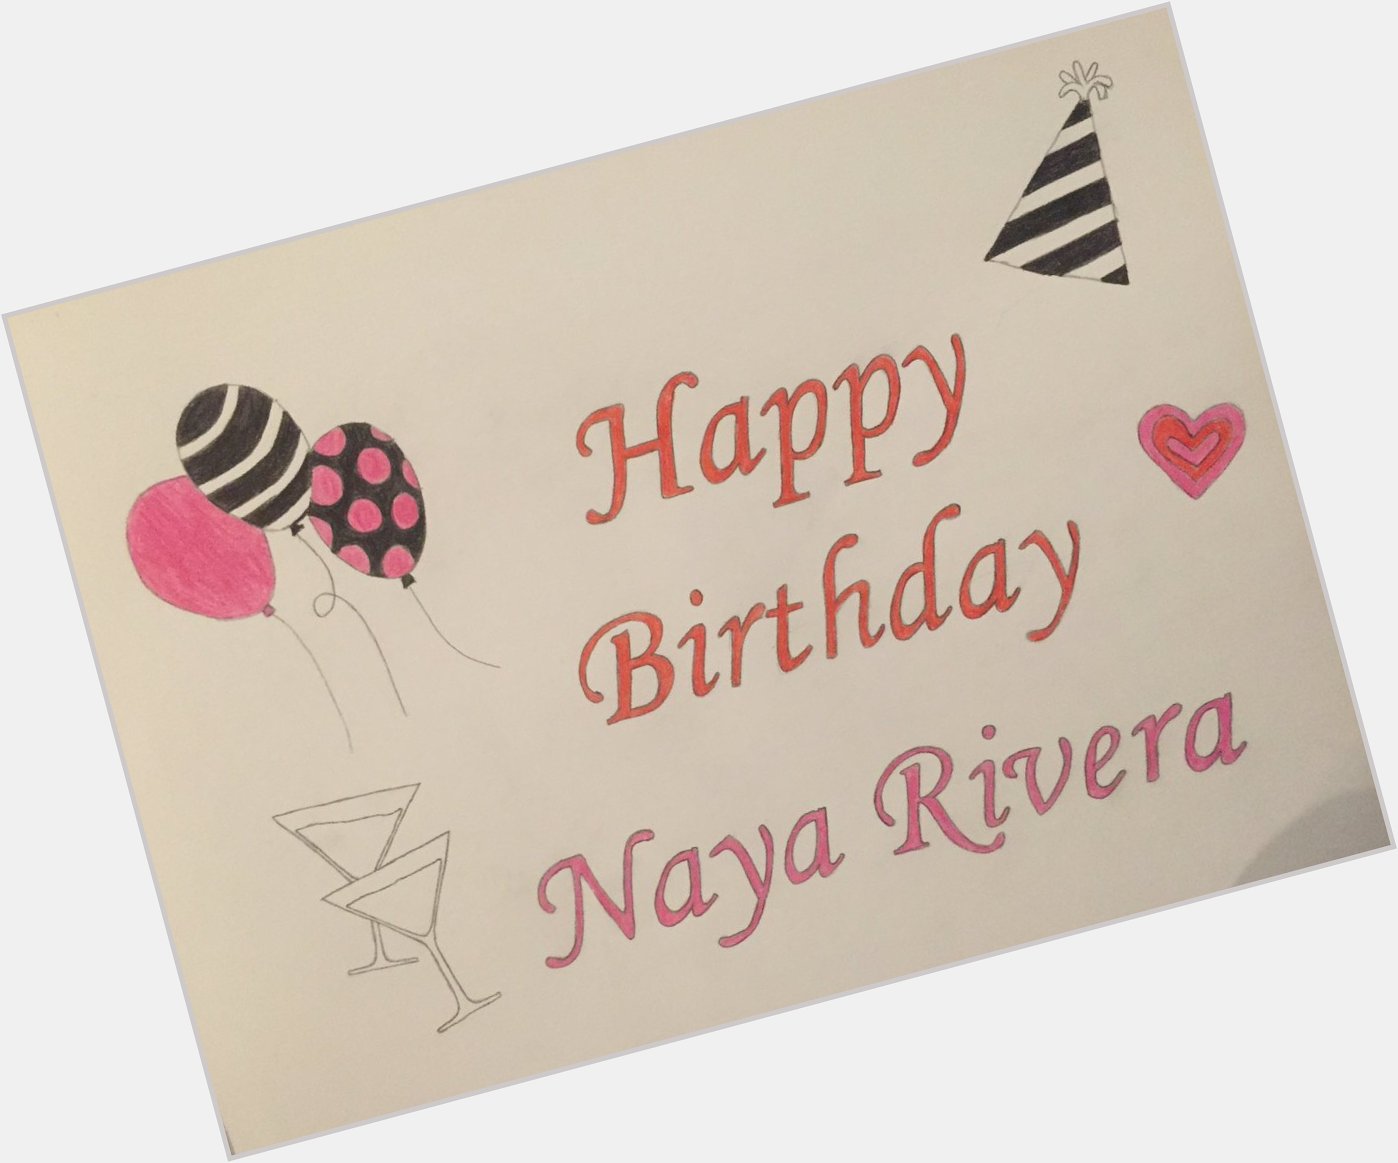 Happy Birthday to the amazing Naya Rivera  I hope you have an amazing day with your loved ones  